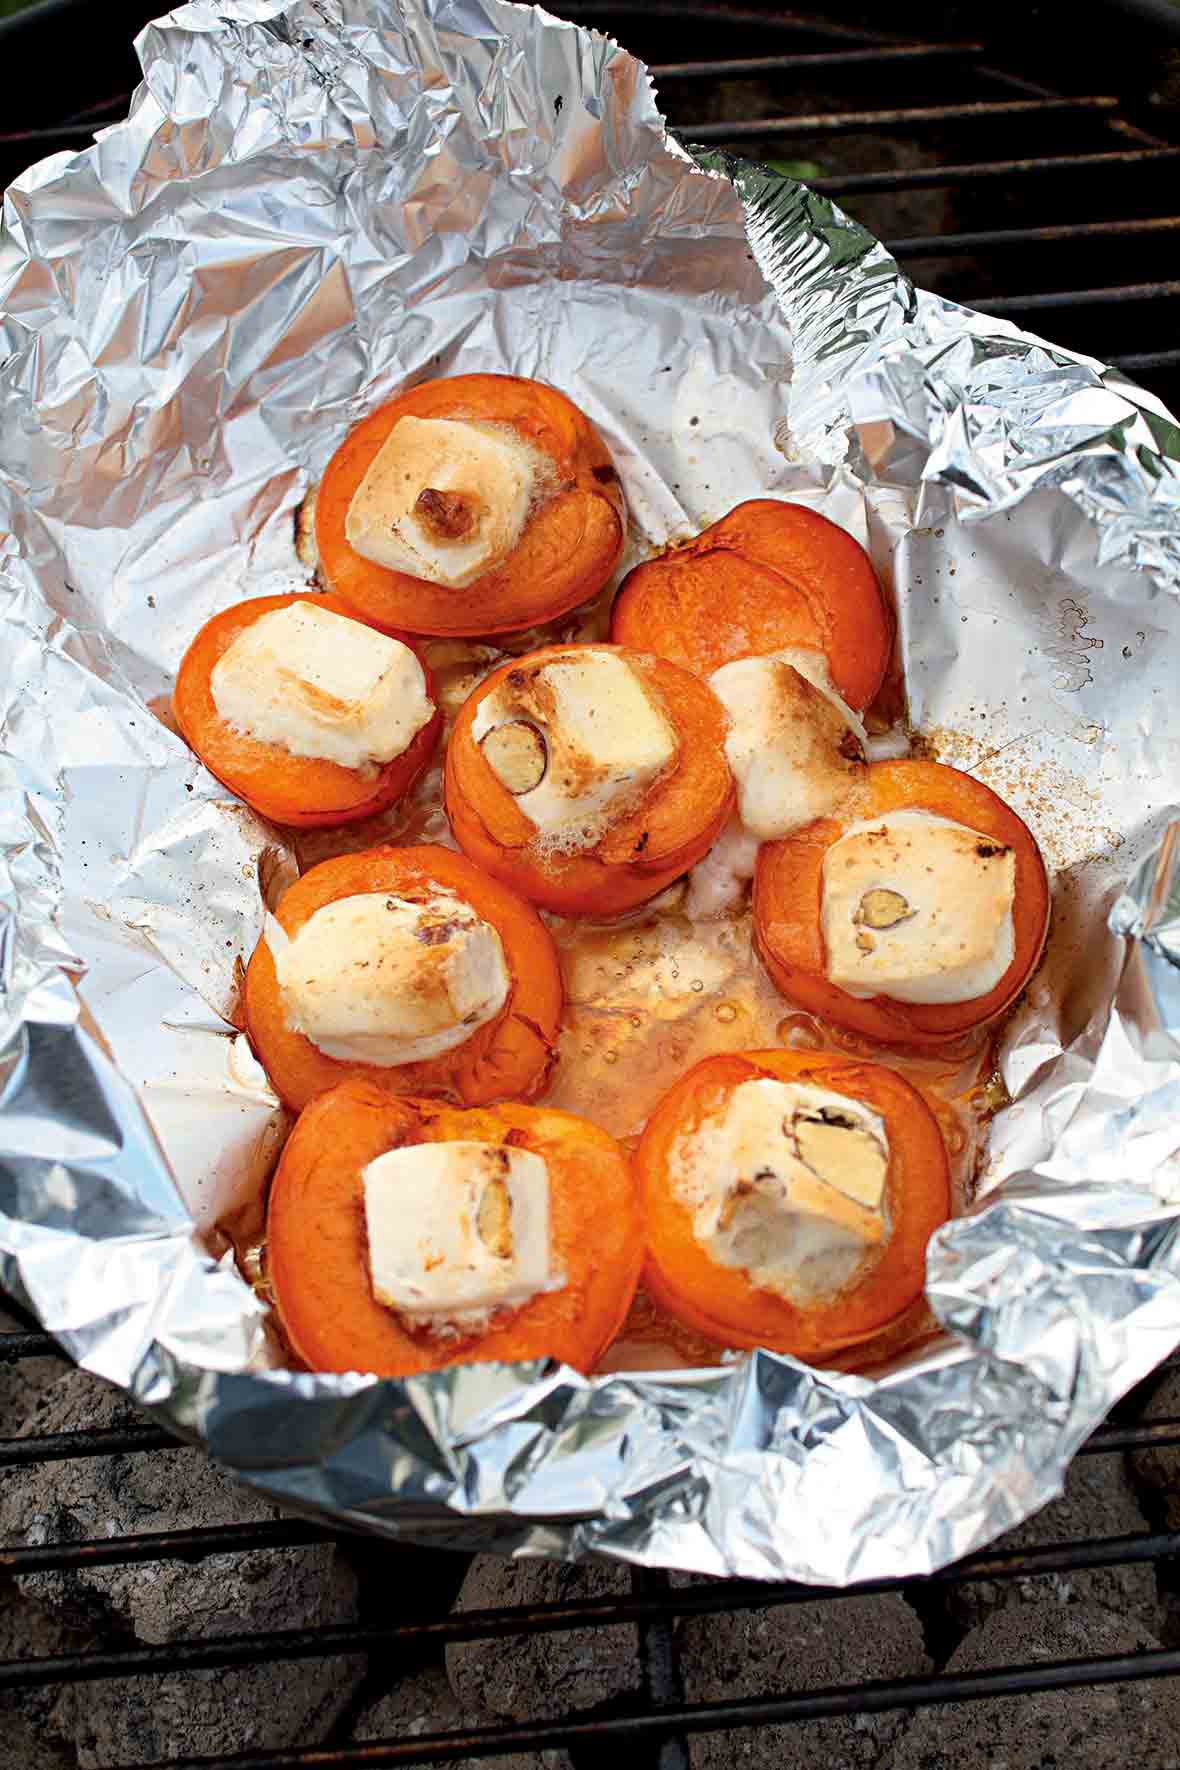 An open foil packet on the grill filled with grilled apricots with gooey nougat in the center.